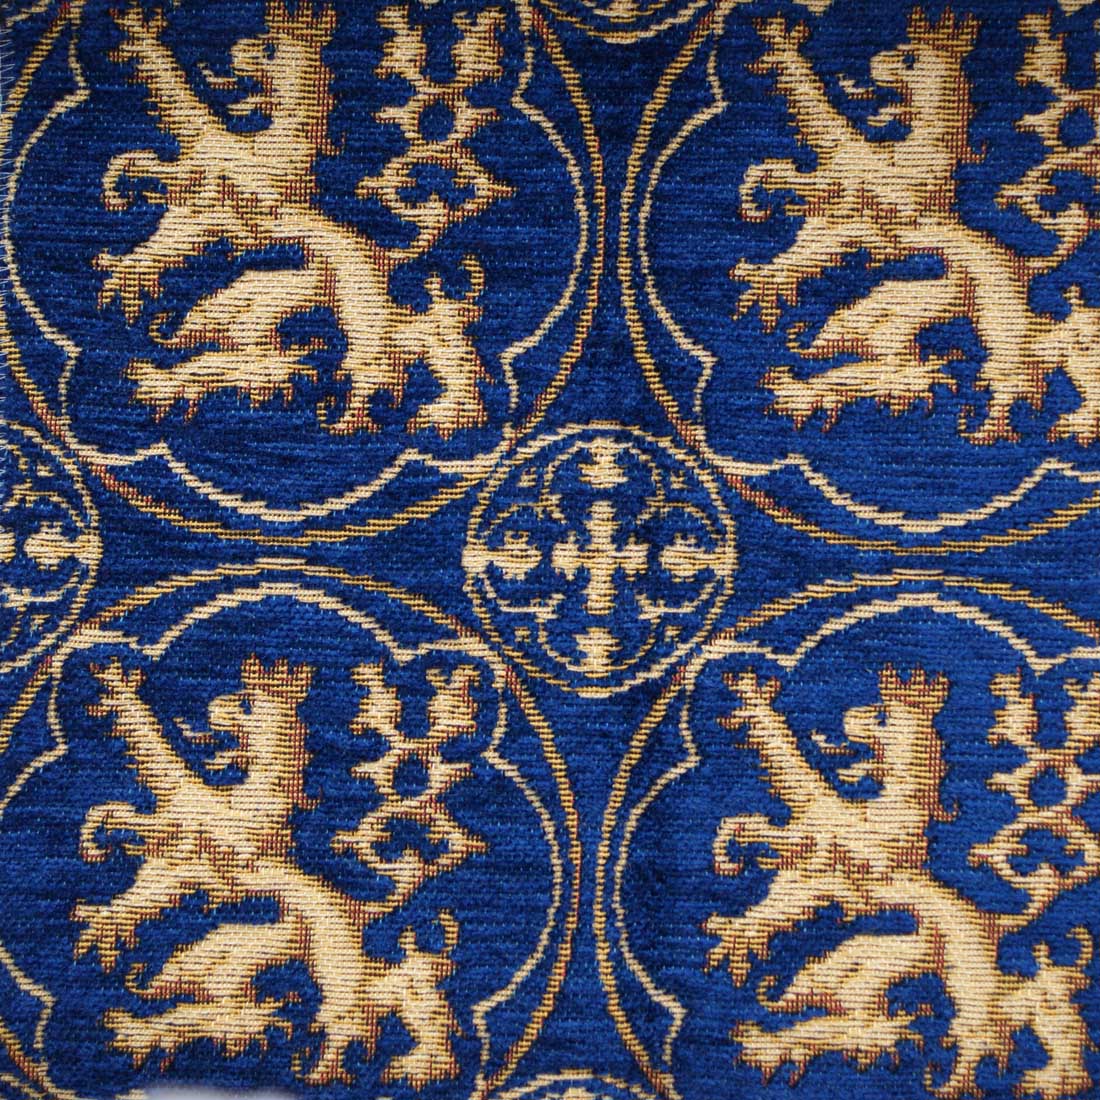 Medieval Lions Rampant Woven Upholstery Curtain Fabric Heirloom tapestries tapestry fabric wall hangings custom tapestries. lions rampant chenille bleu